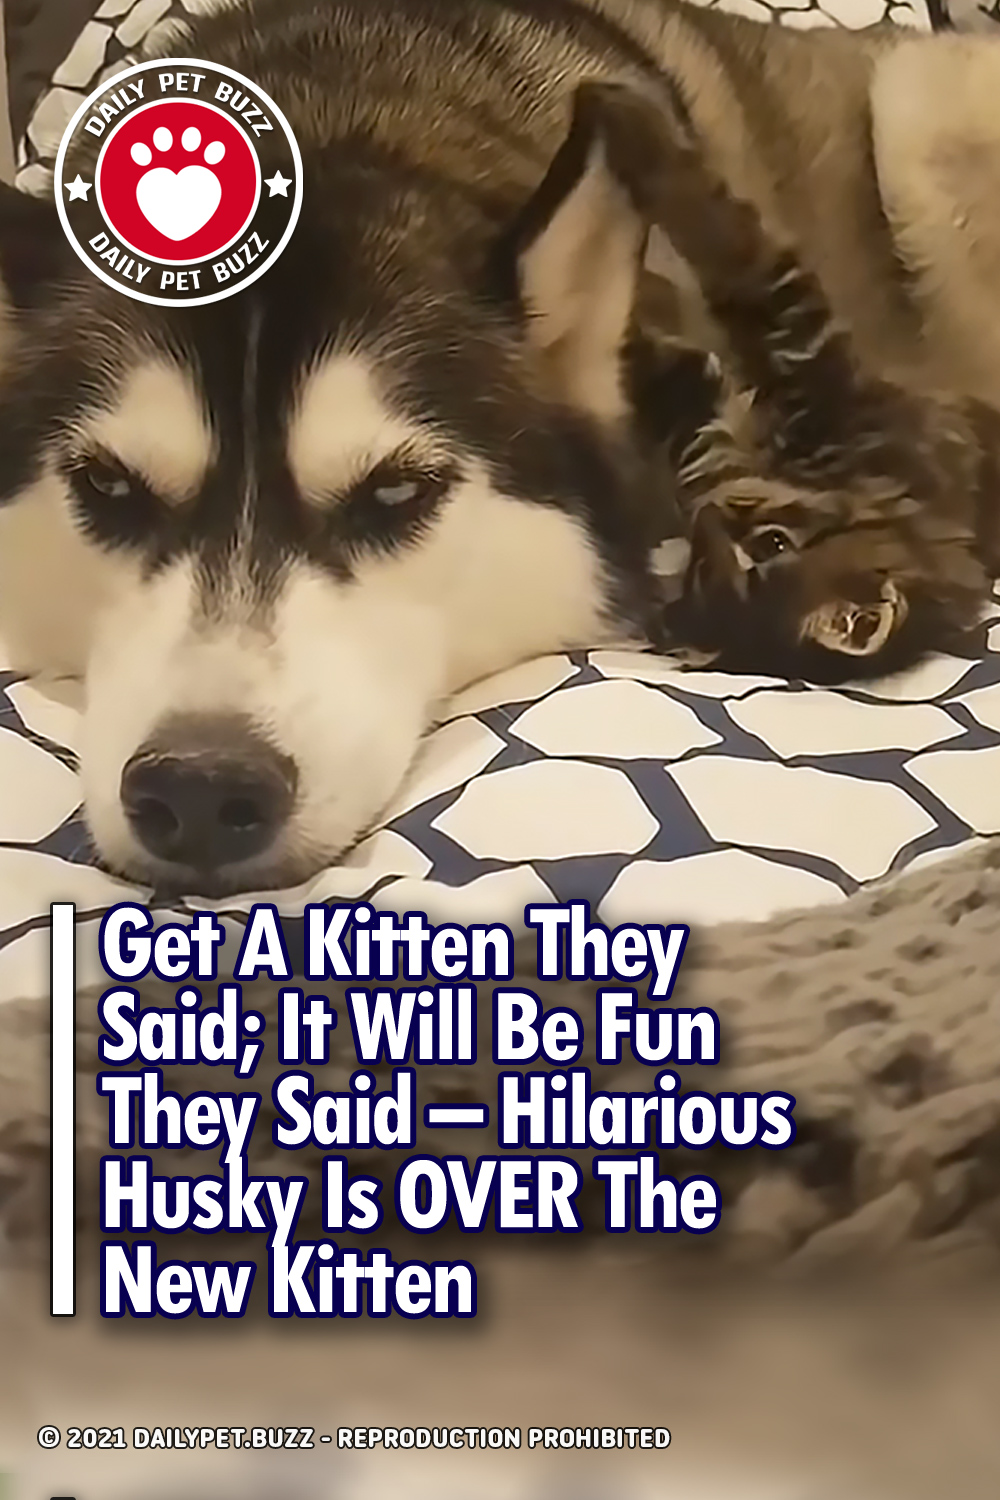 Get A Kitten They Said; It Will Be Fun They Said – Hilarious Husky Is OVER The New Kitten